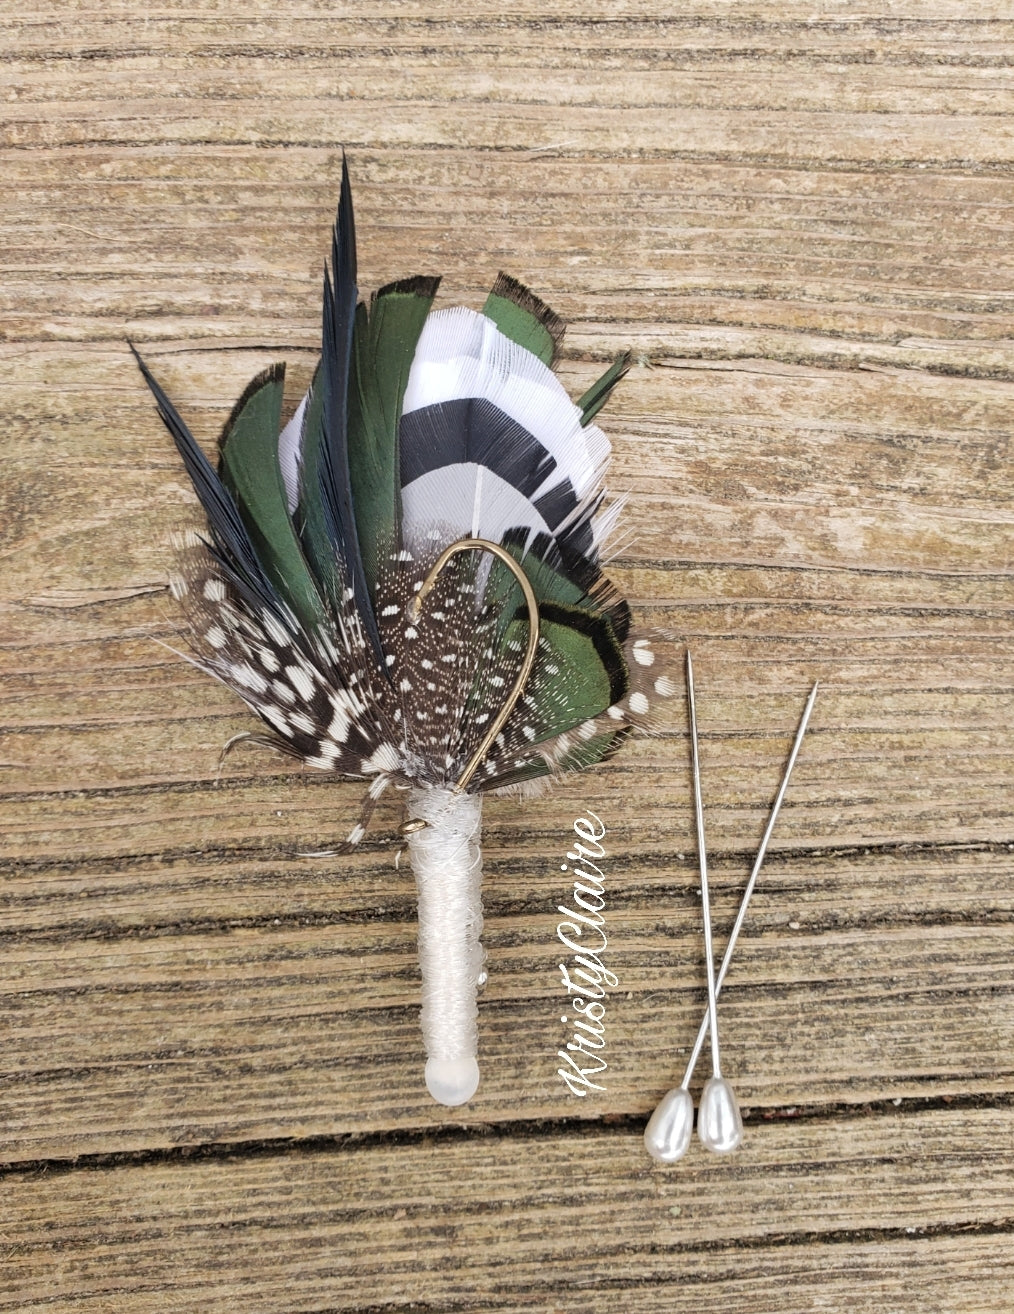 Hunter Green, Fishing Boutonniere, White, Black, Gray, Green, Emerald, Feathers, Buttonhole, lapel, Pin-on, Corsage, Prom, Wedding, Event